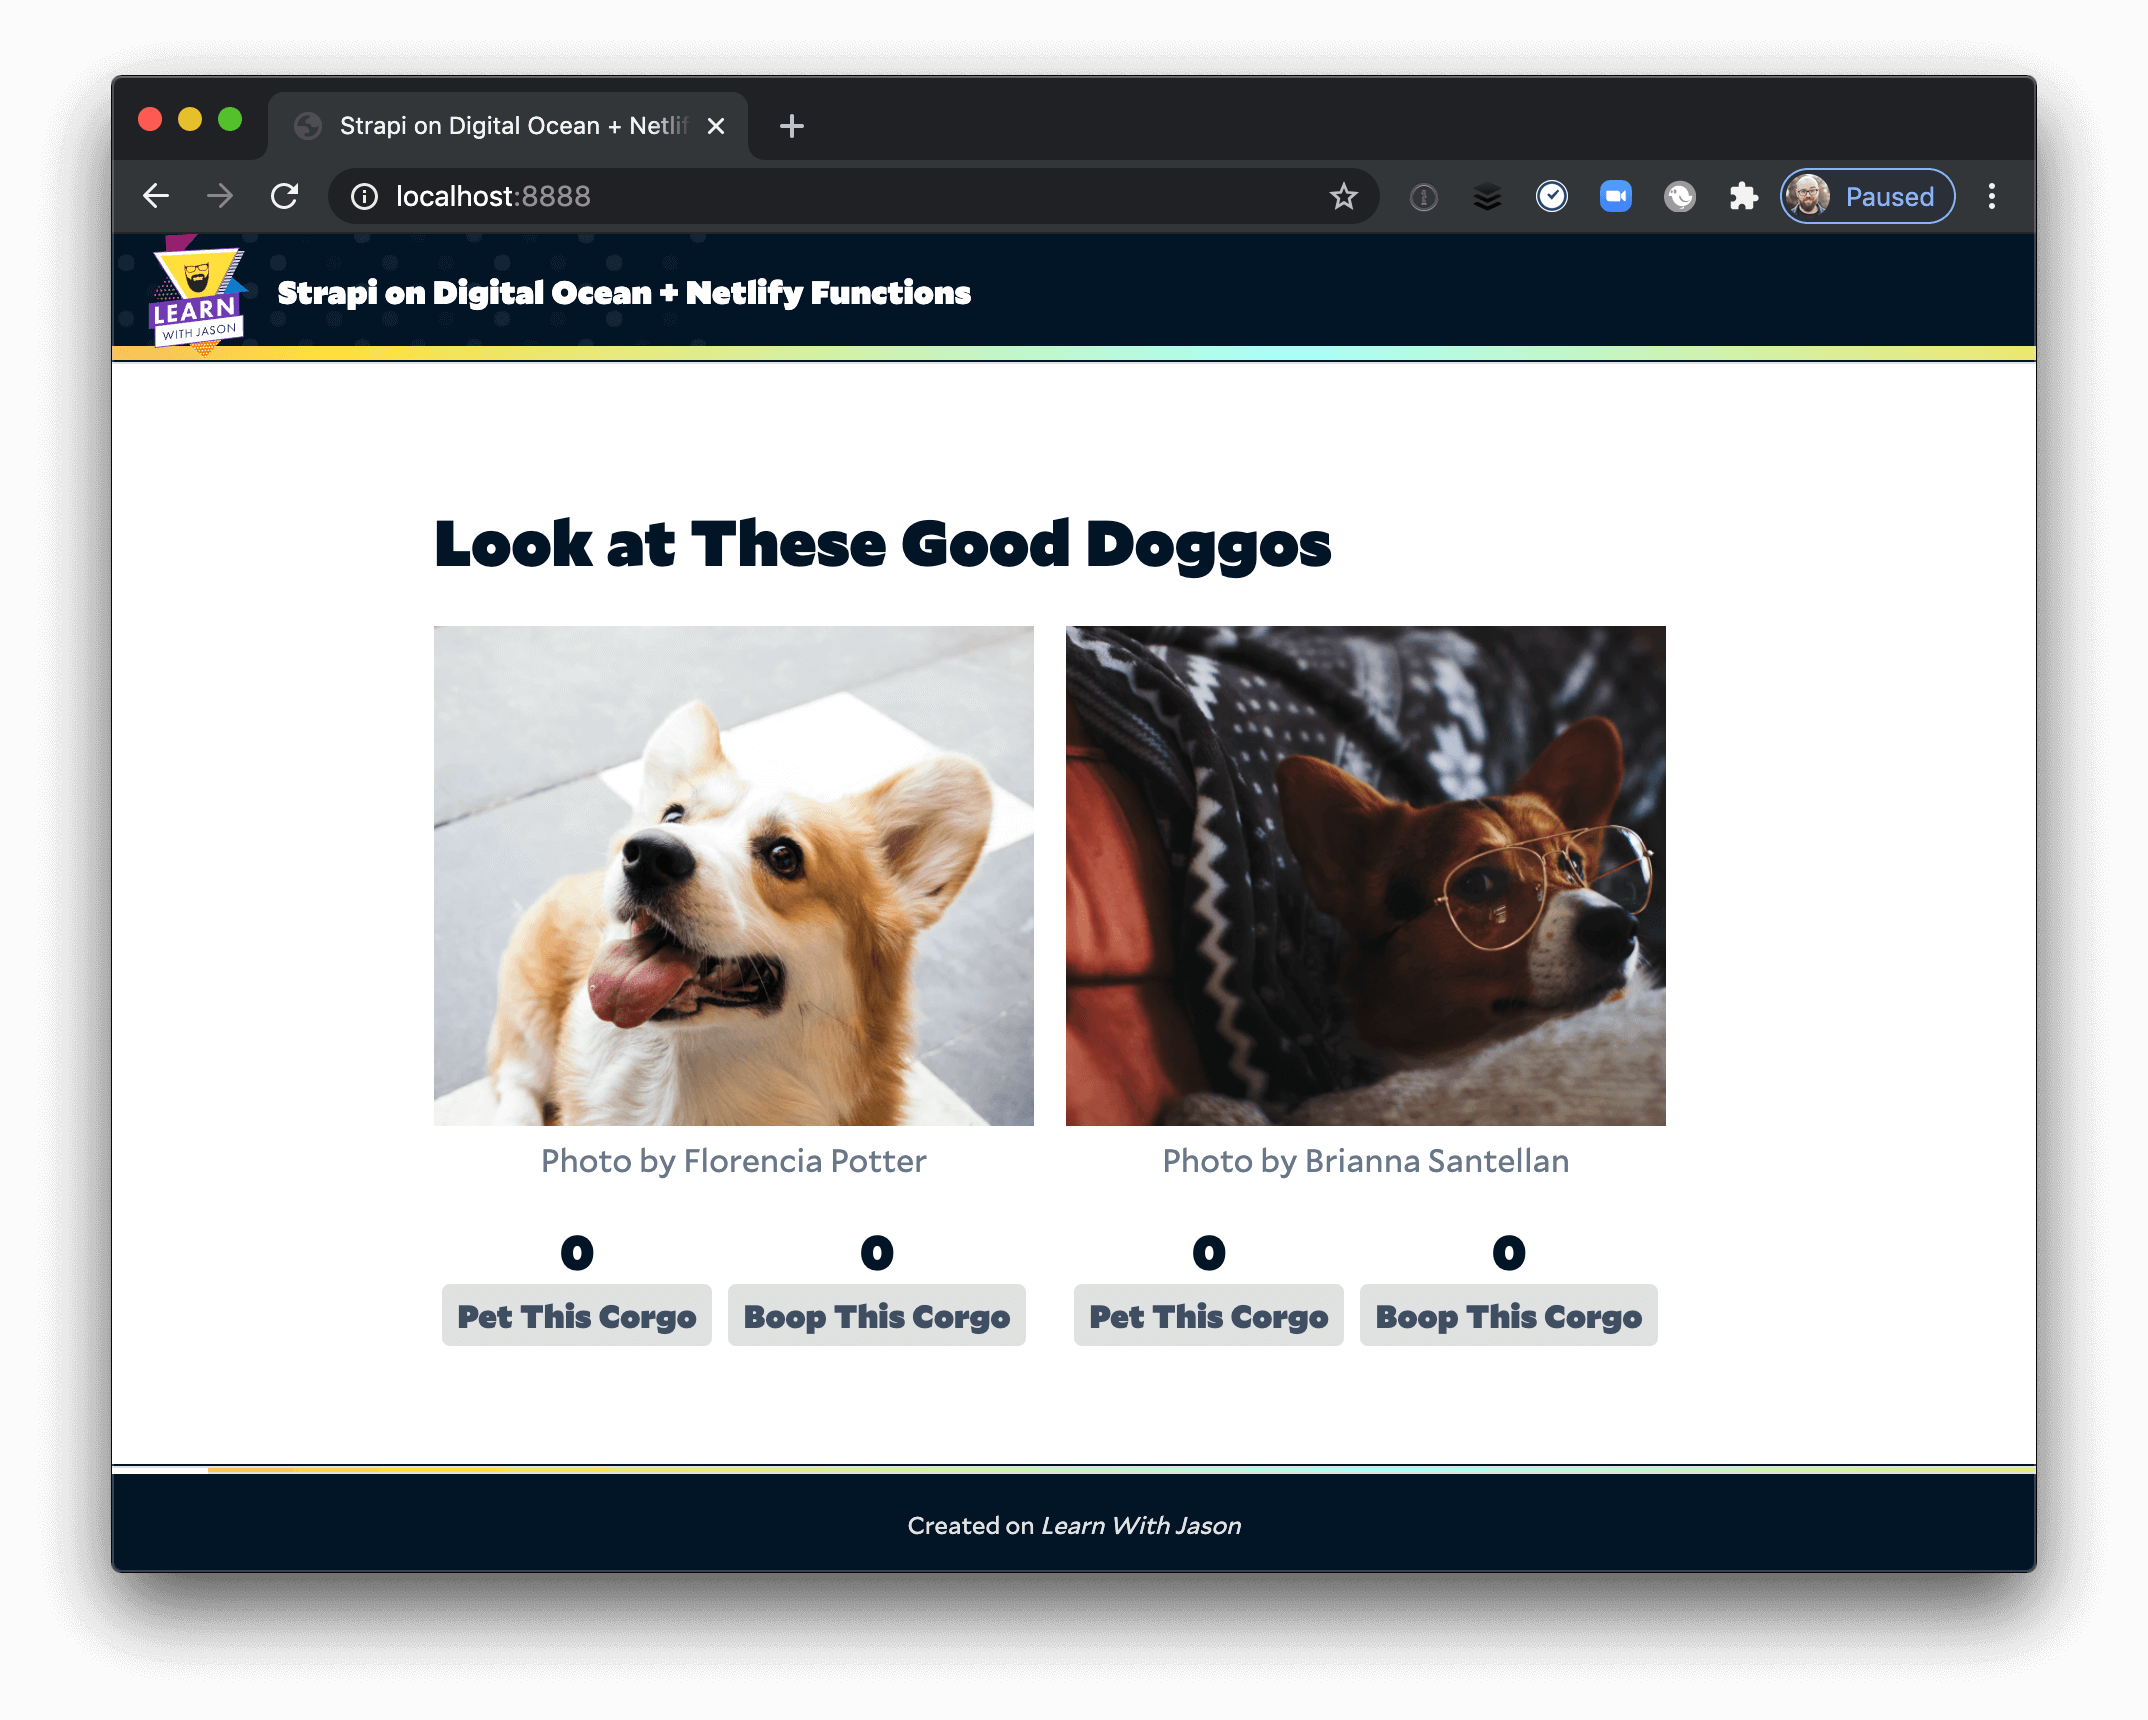 Corgi images displaying in the front-end with reaction counts and buttons.